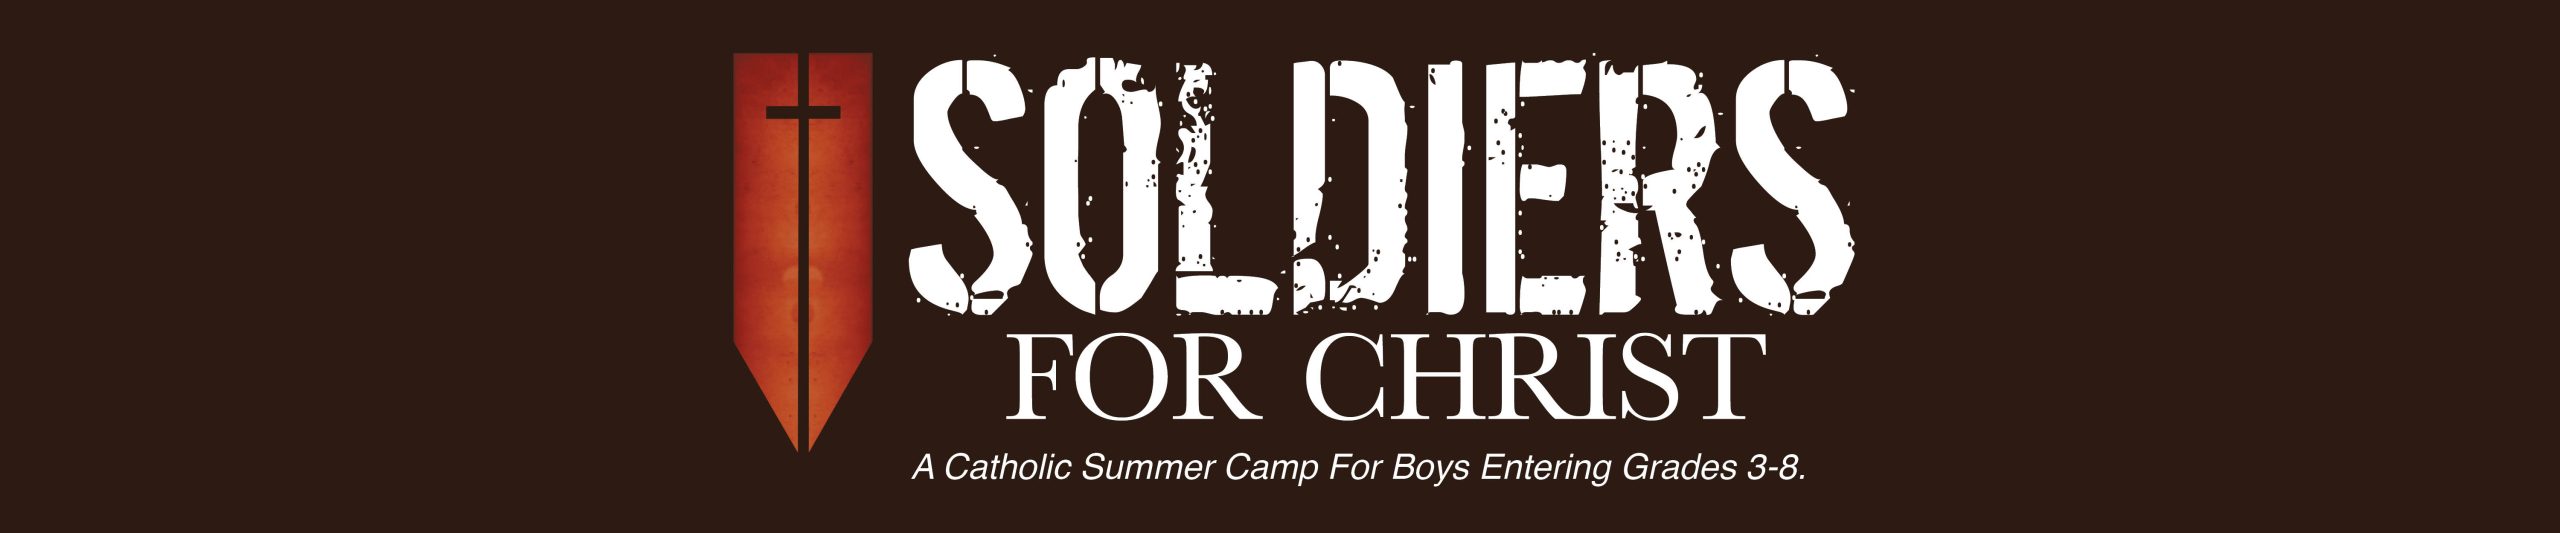 CLE-Soldiers-for-Christ-Banner